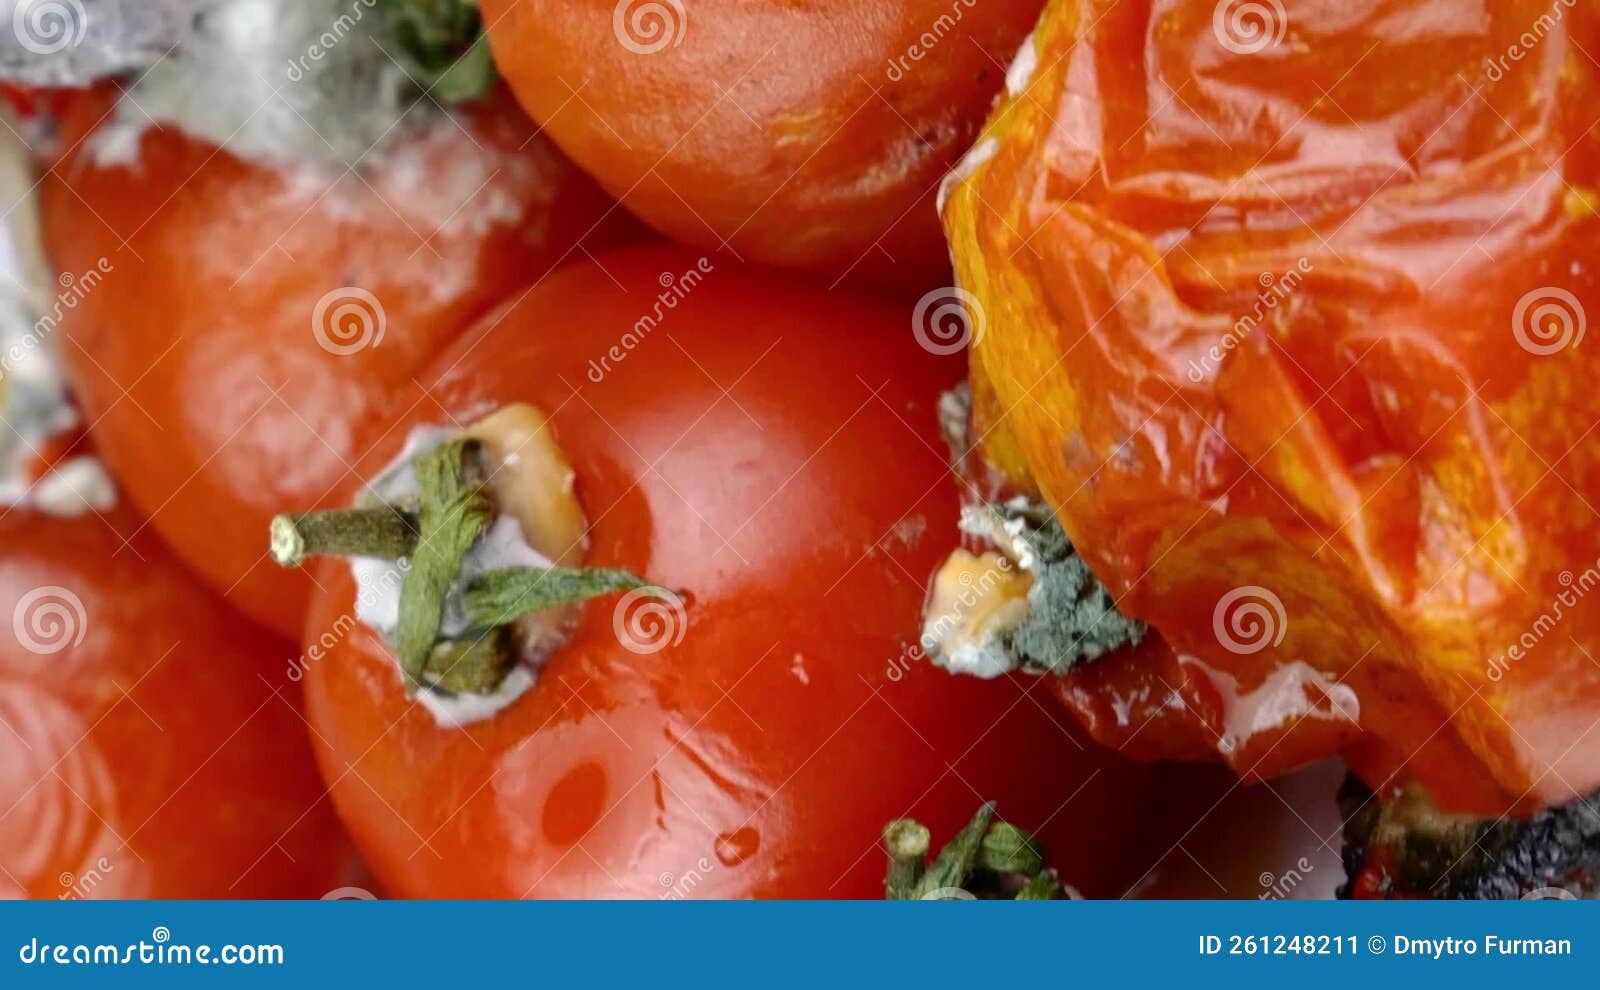 Premium Photo  Spoiled rotten tomatoes rot mold on vegetables pile organic  bio waste food loss and food waste